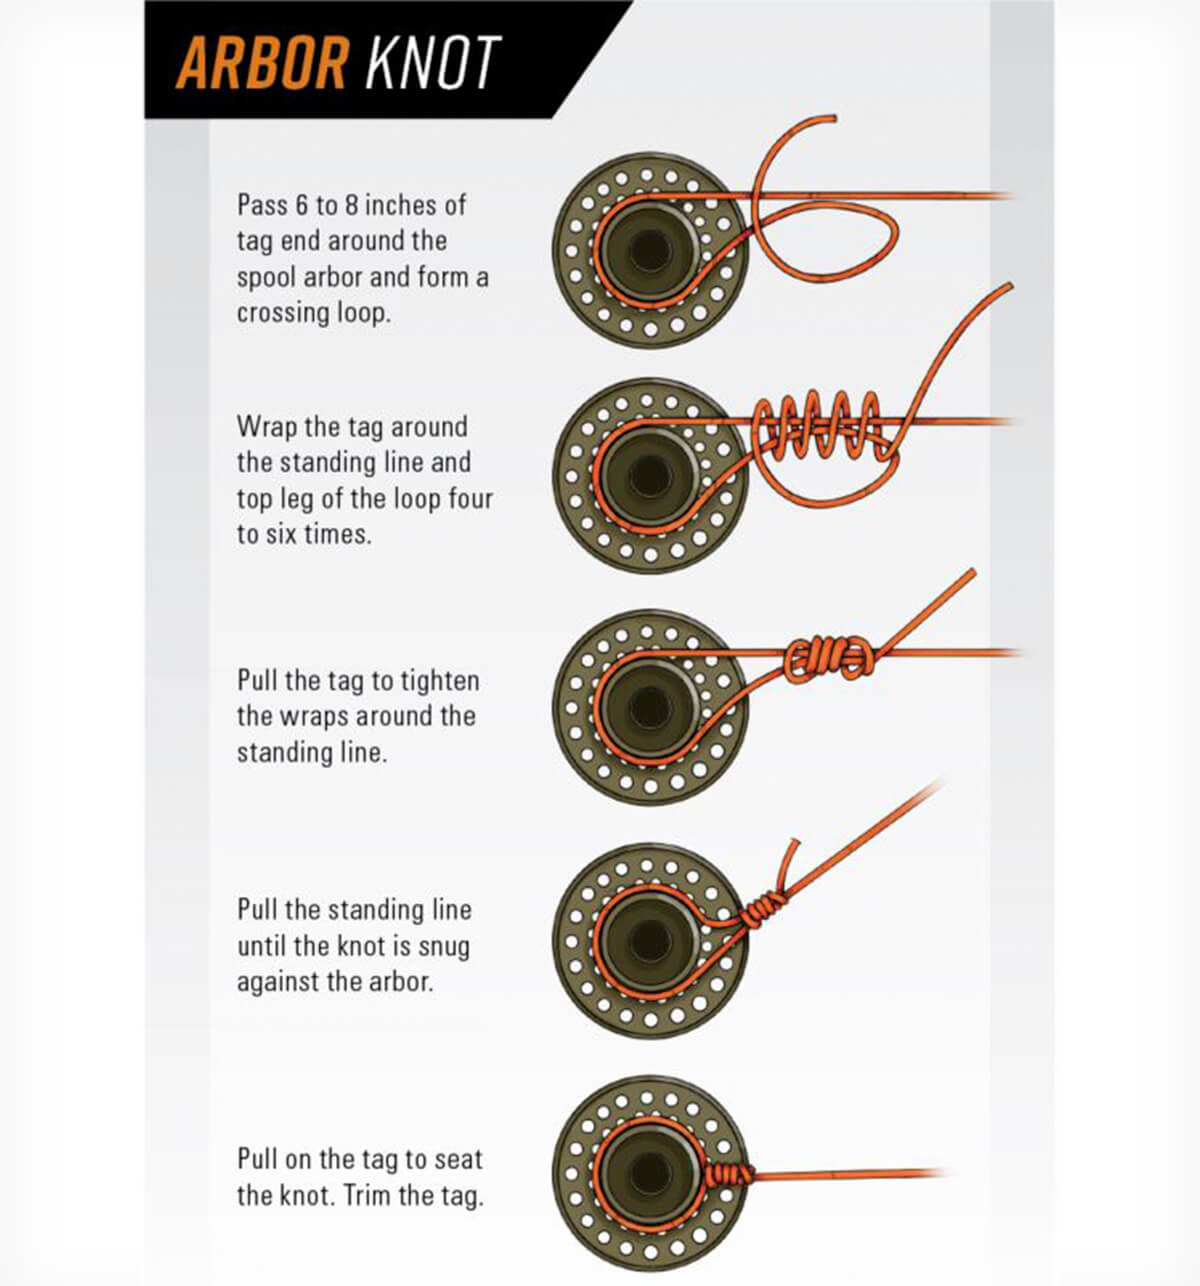 Fishing Knots Proven to Work for Light Tackle and Fly by Lefty Kreh Hardcover for sale online 